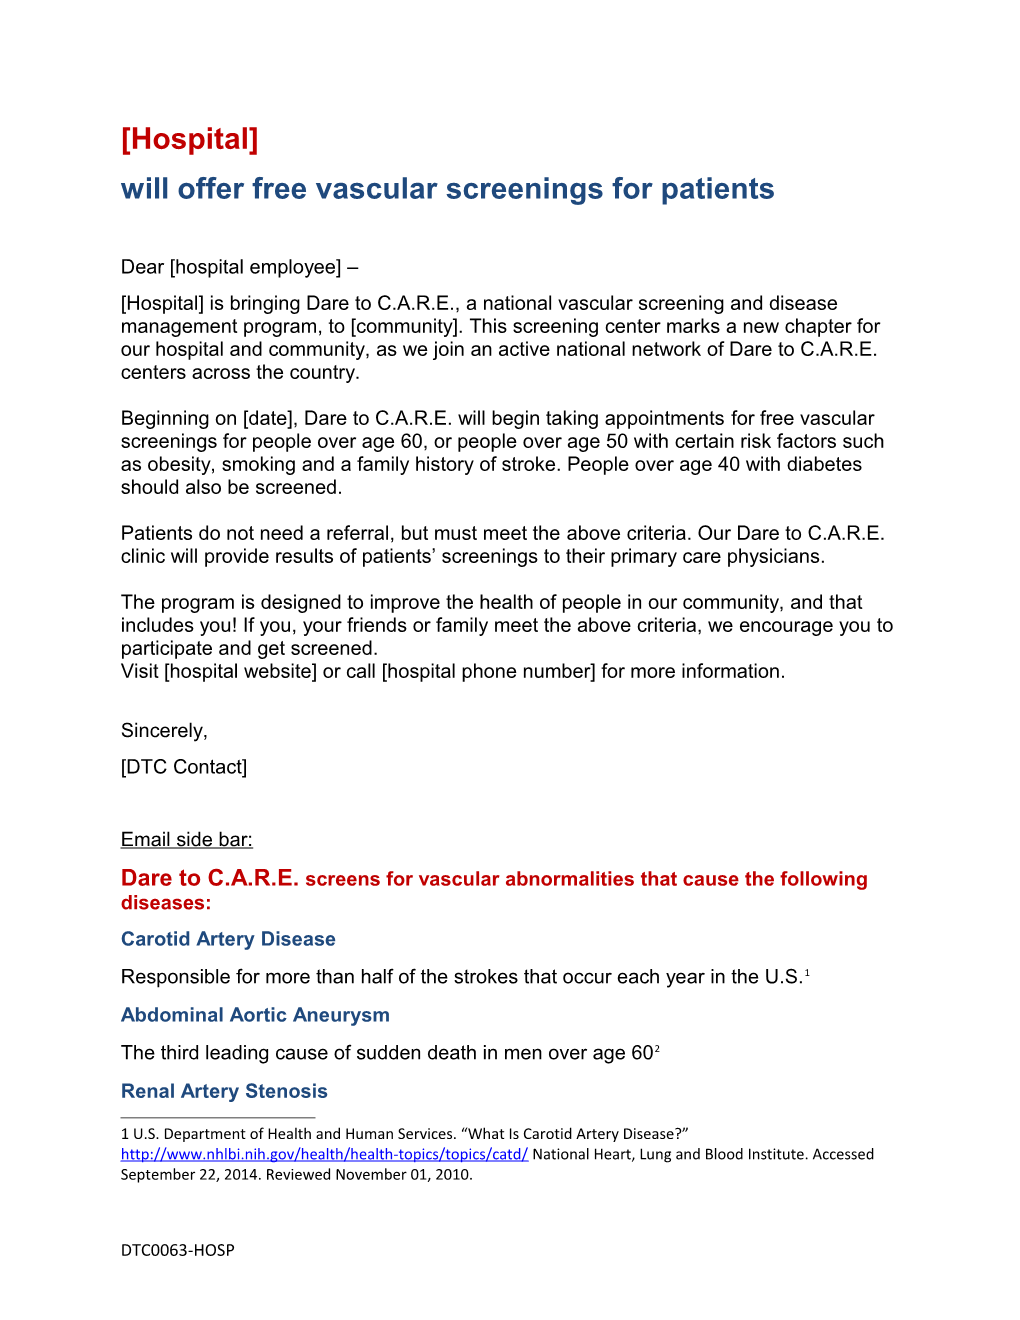 Will Offer Free Vascular Screenings for Patients